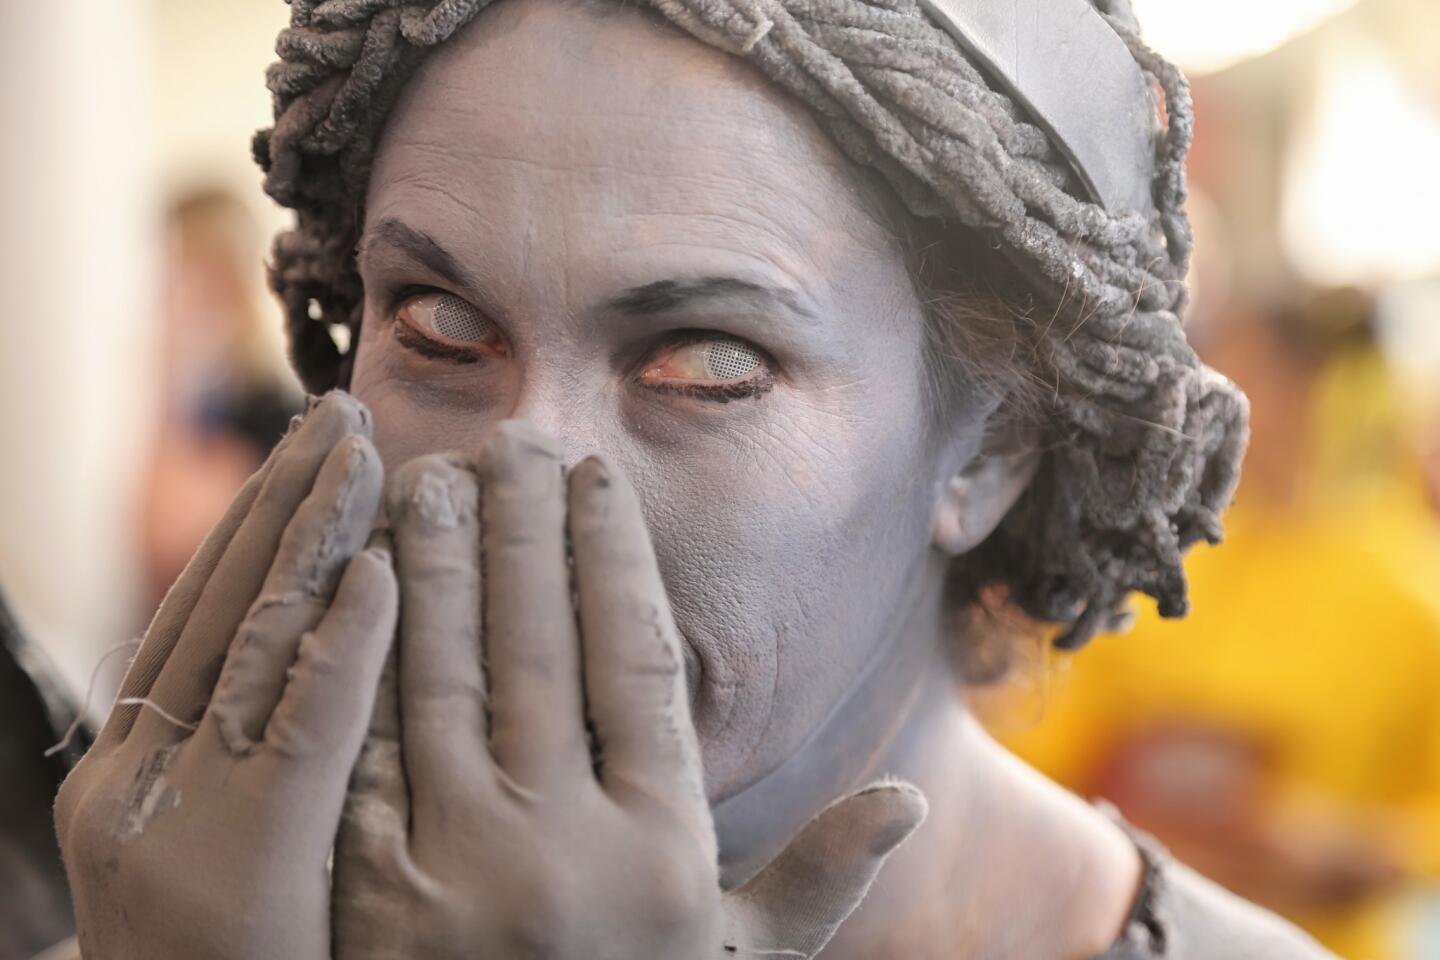 Christina Silvoso, dressed as a Weeping Angel from the Dr. Who series